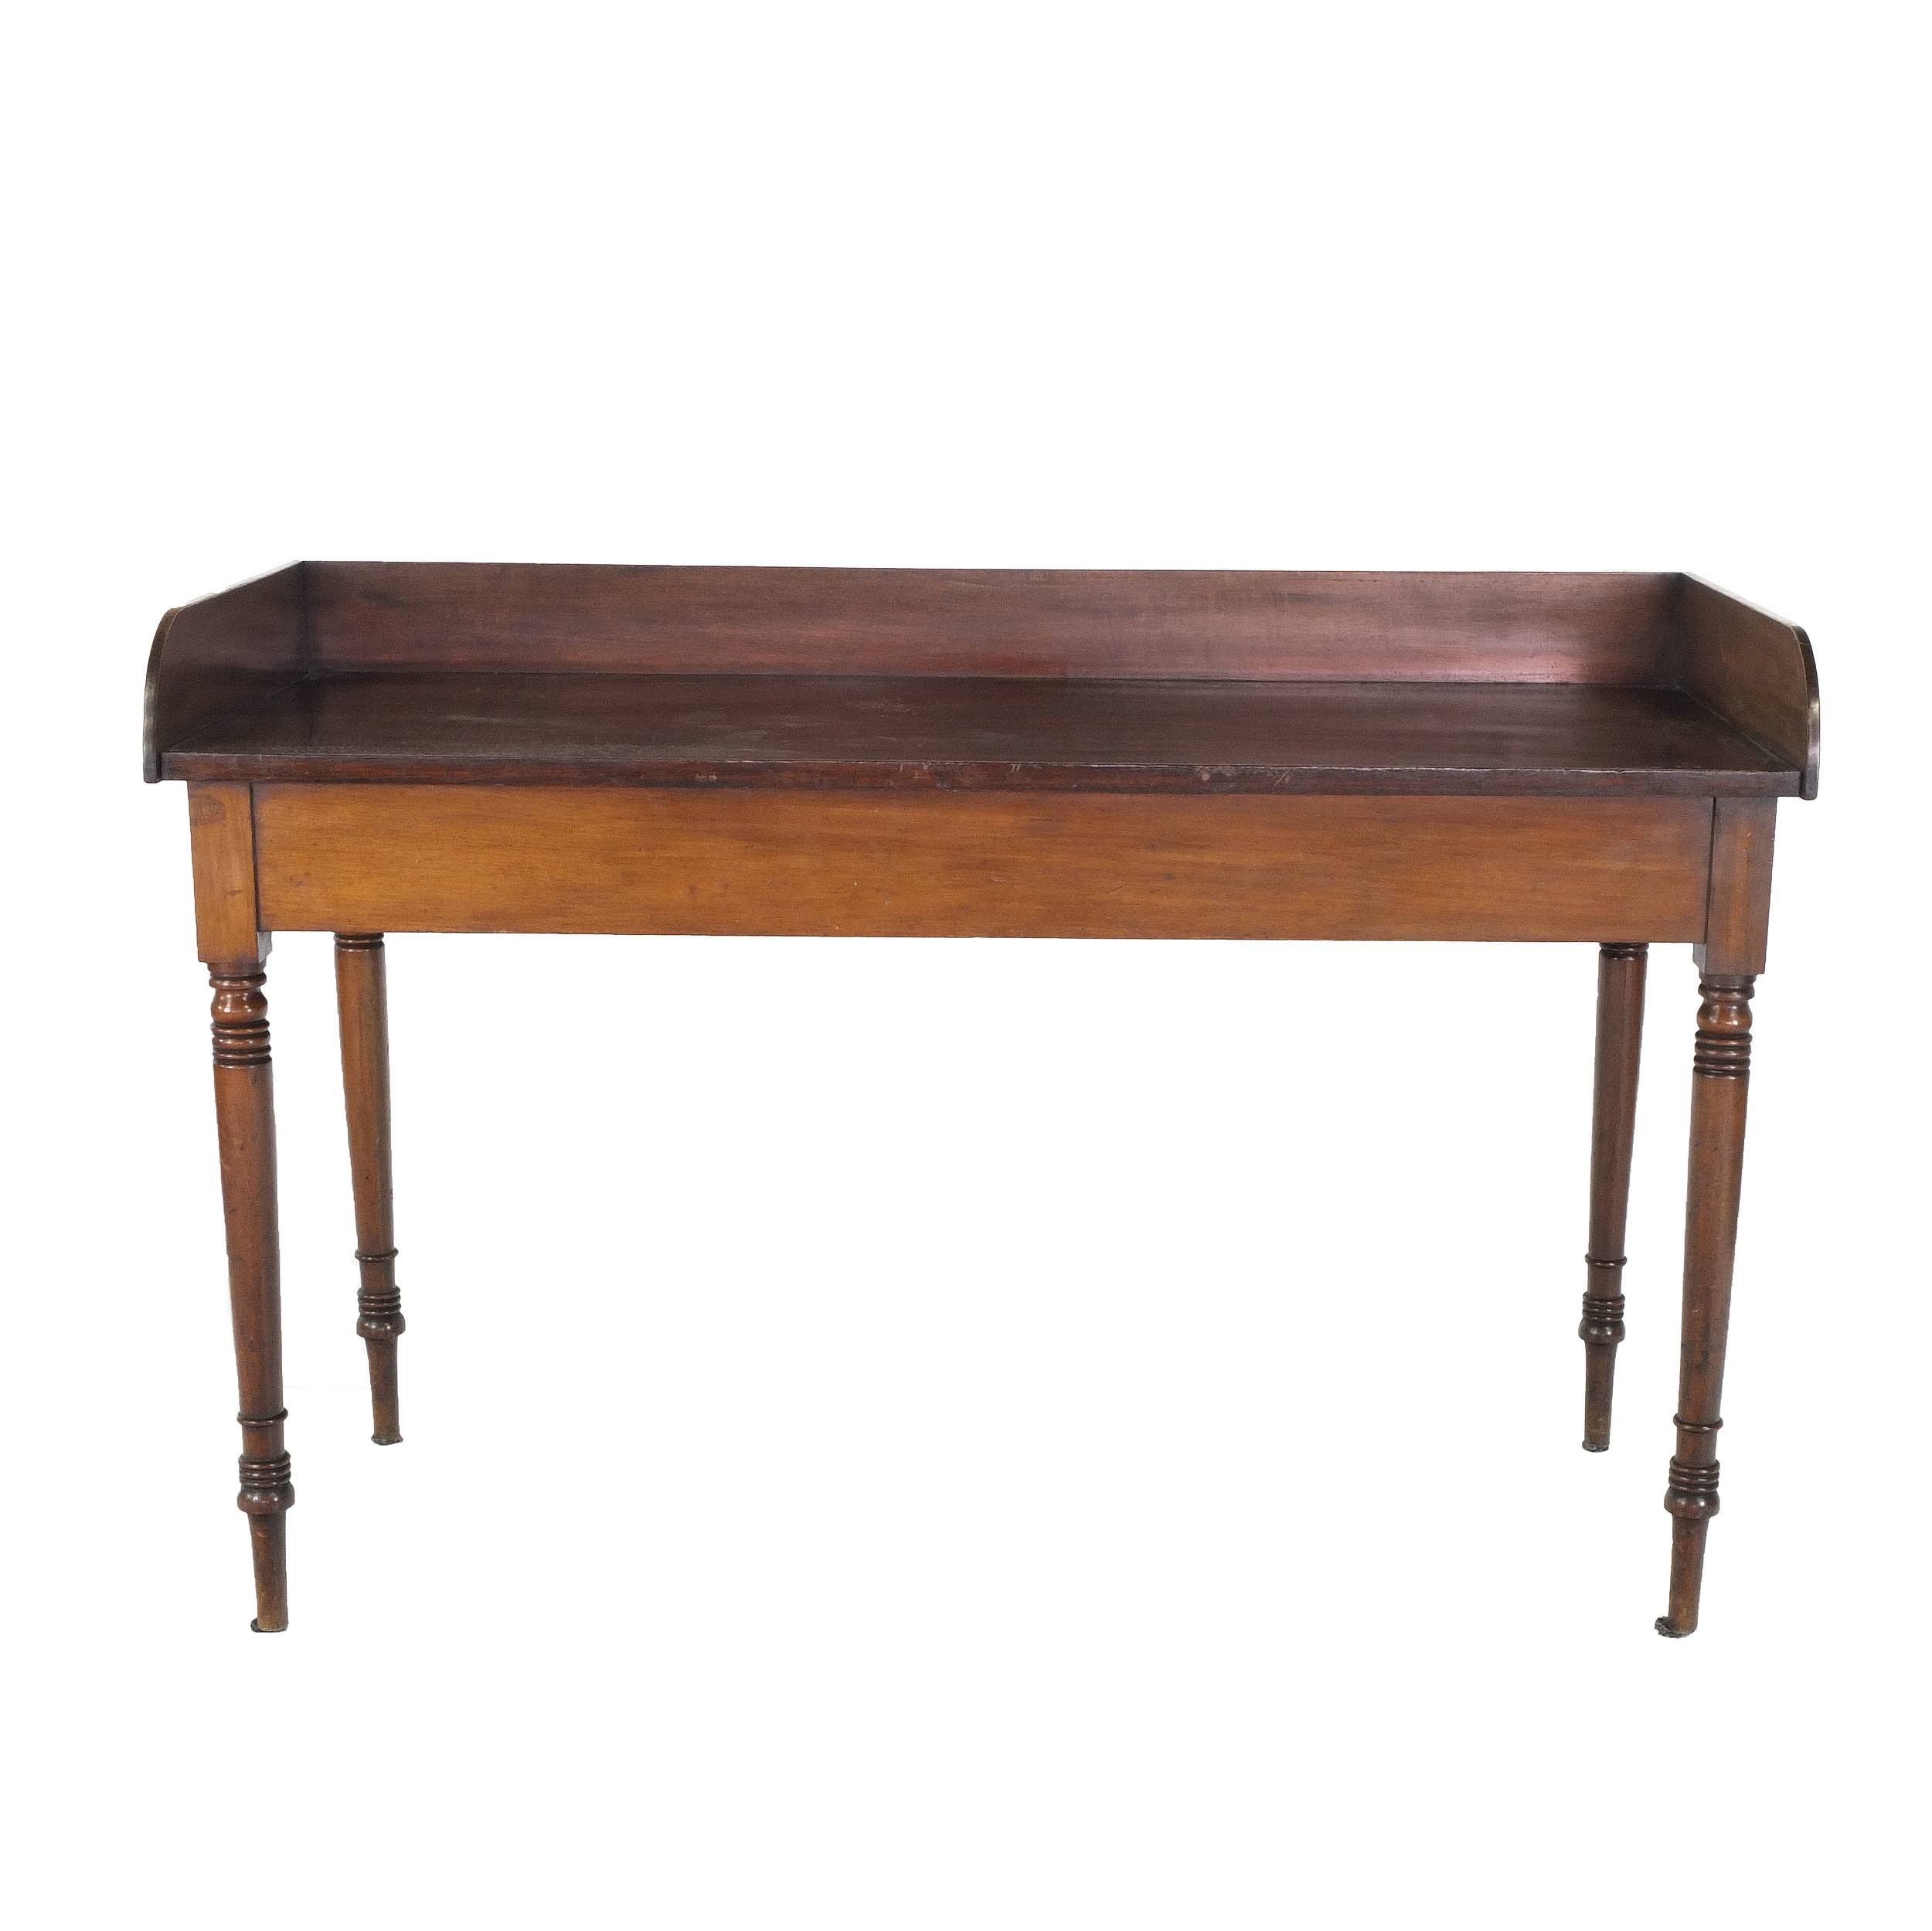 'Good English Mahogany Side Table with Gallery Back on Finely Turned Triple Ring Legs Circa 1820-1840'